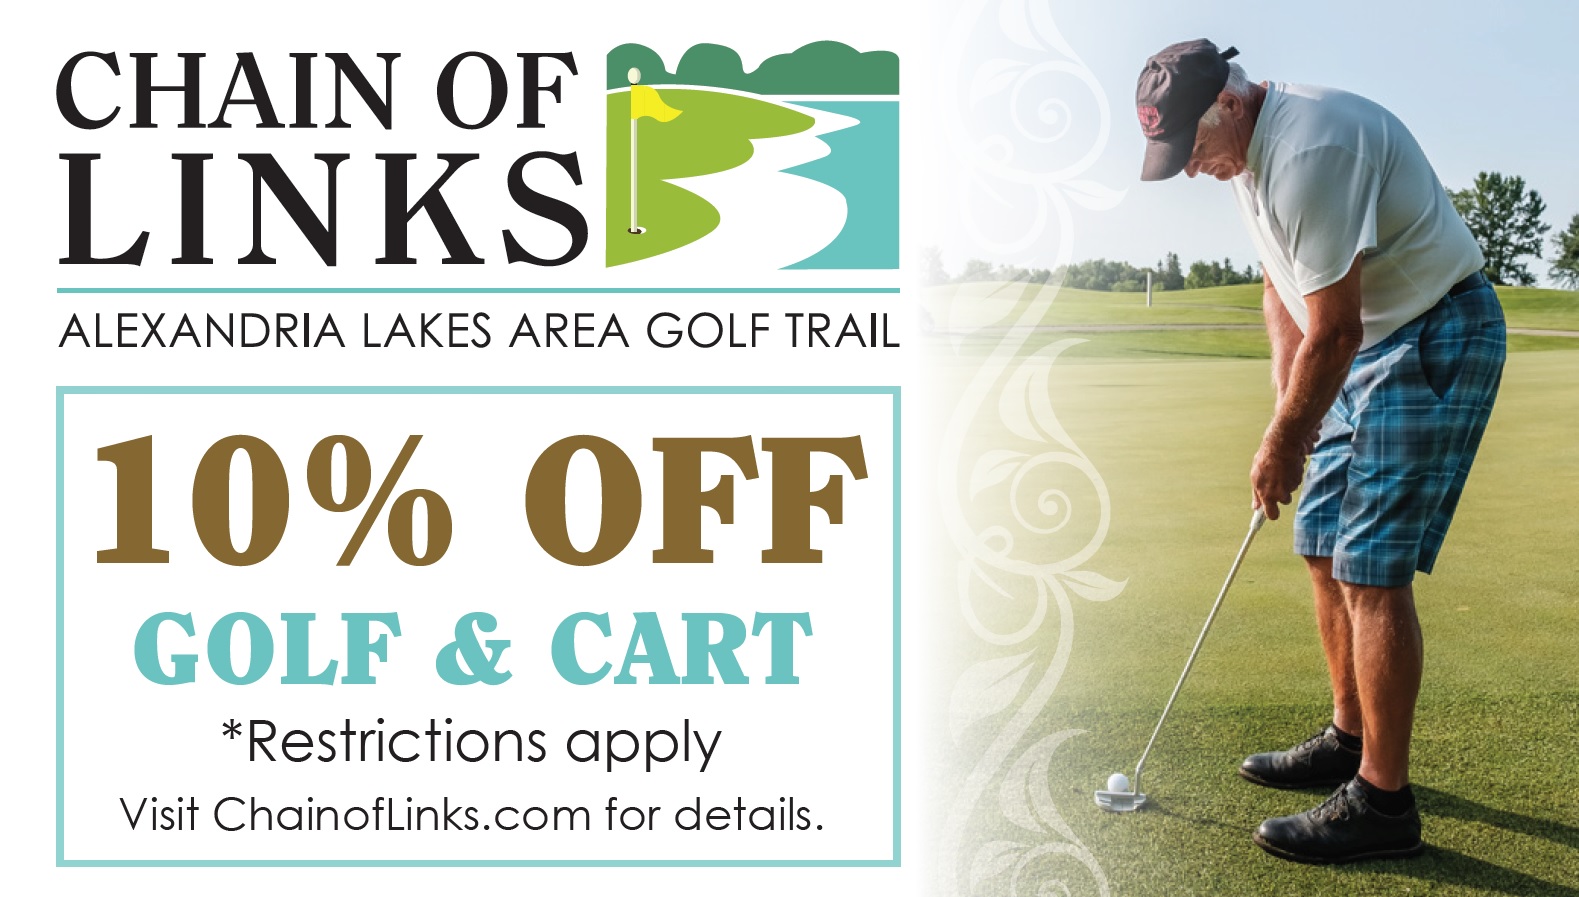 Chain of Links 10% off rentals